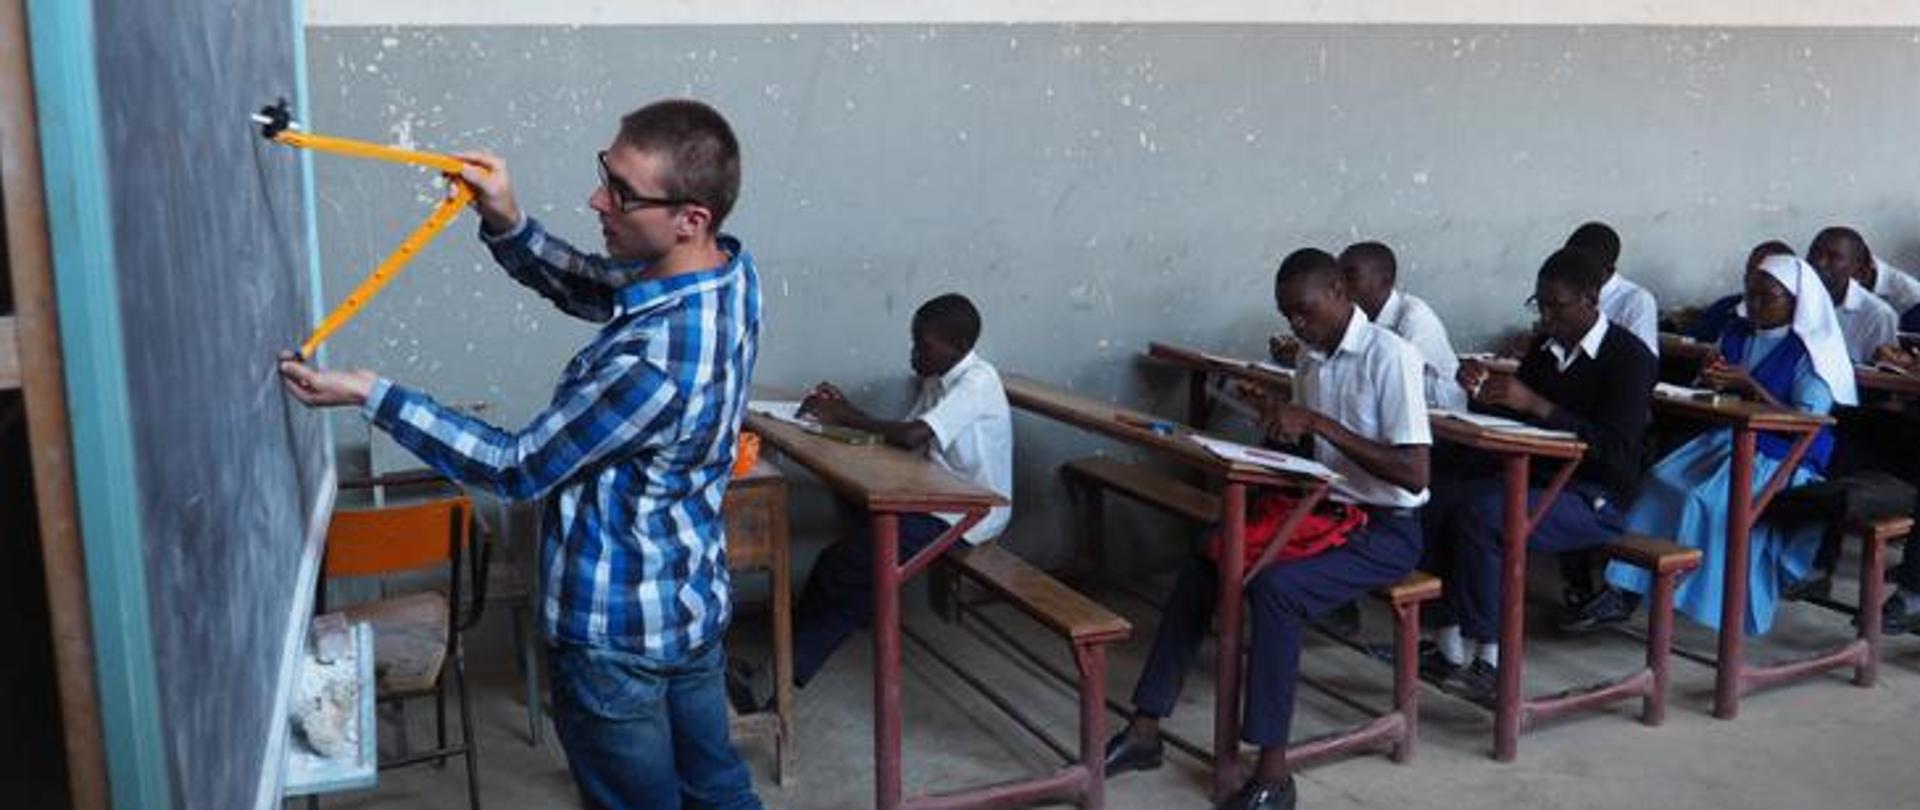 Innovations in education - supporting technical education in Dodoma school using modern teaching methods
